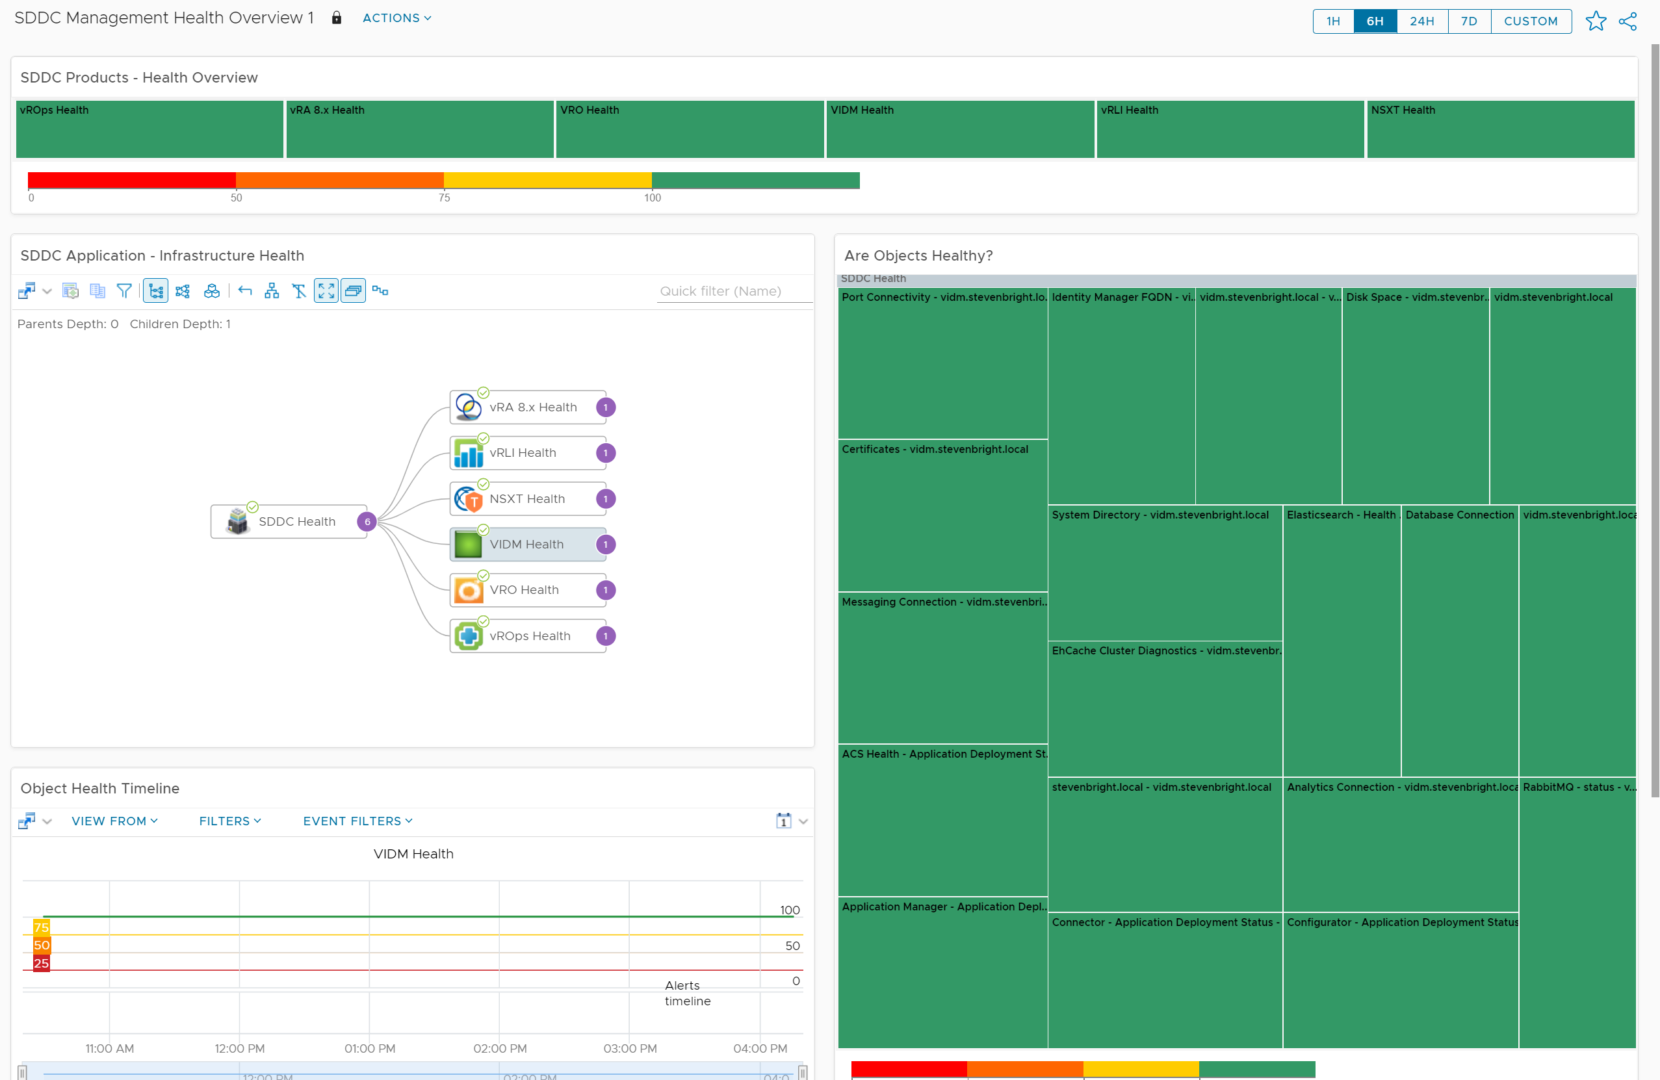 vRealize Operations - SDDC Health Monitoring Solution - Health Overview Dashboard